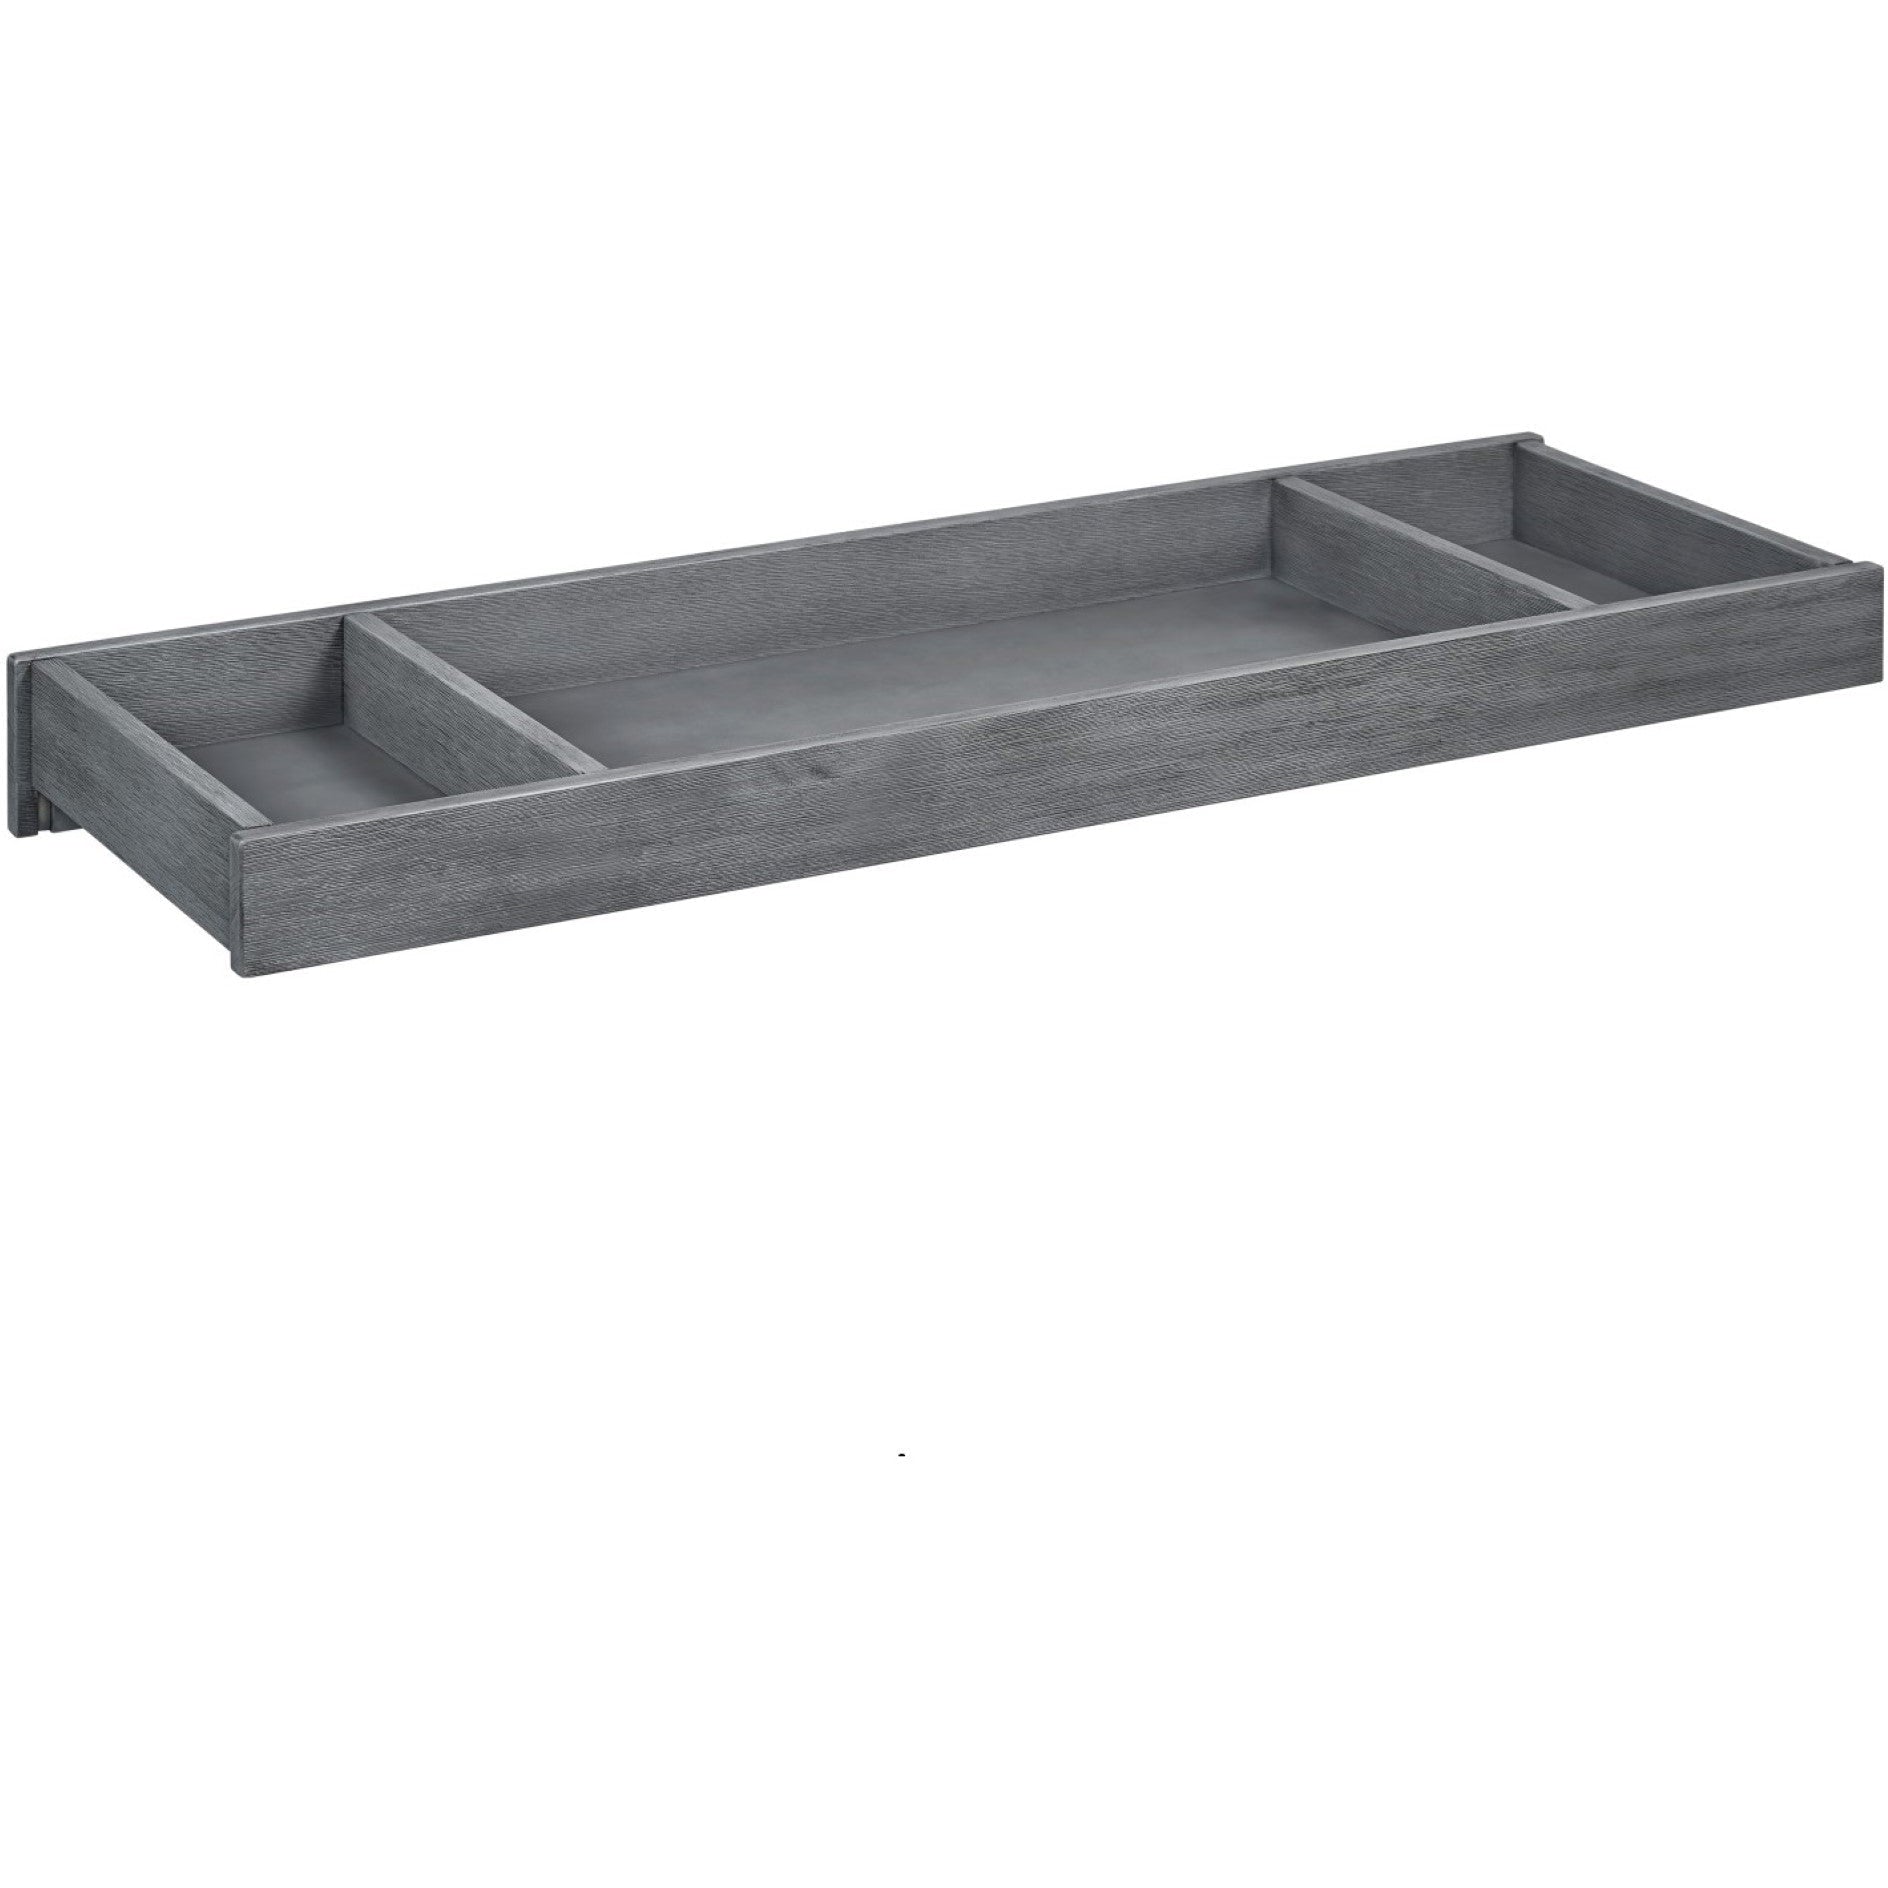 Lincroft Changing Tray